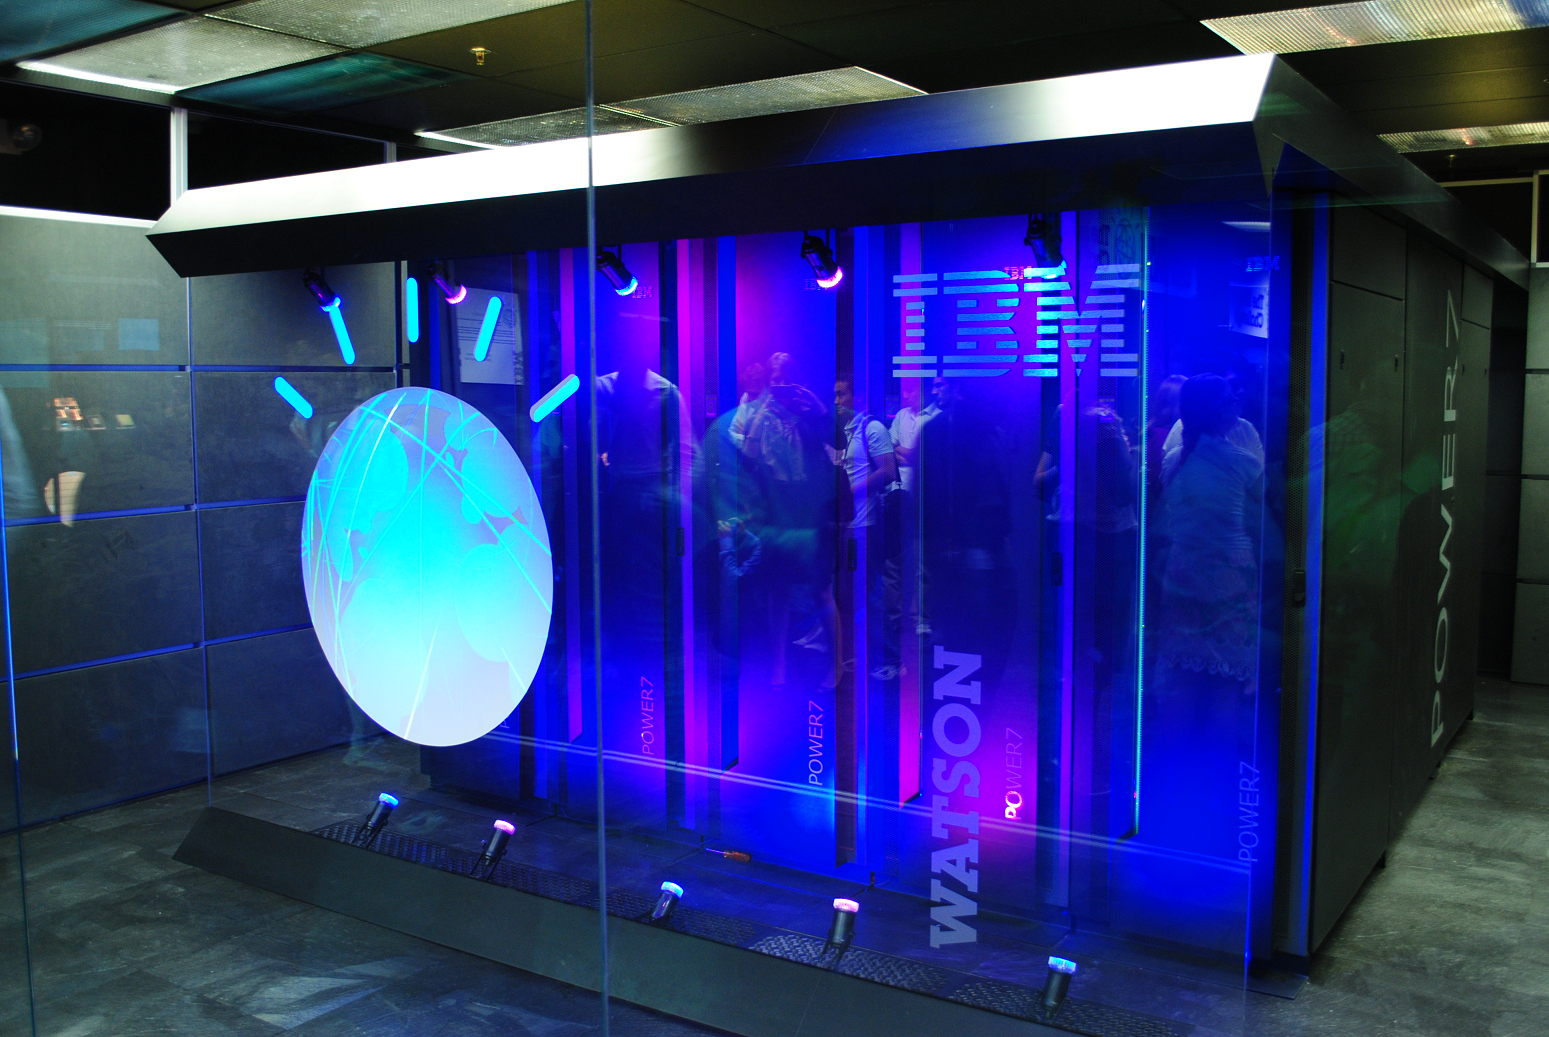 Small NY Uni Gets Its Own Watson From IBM